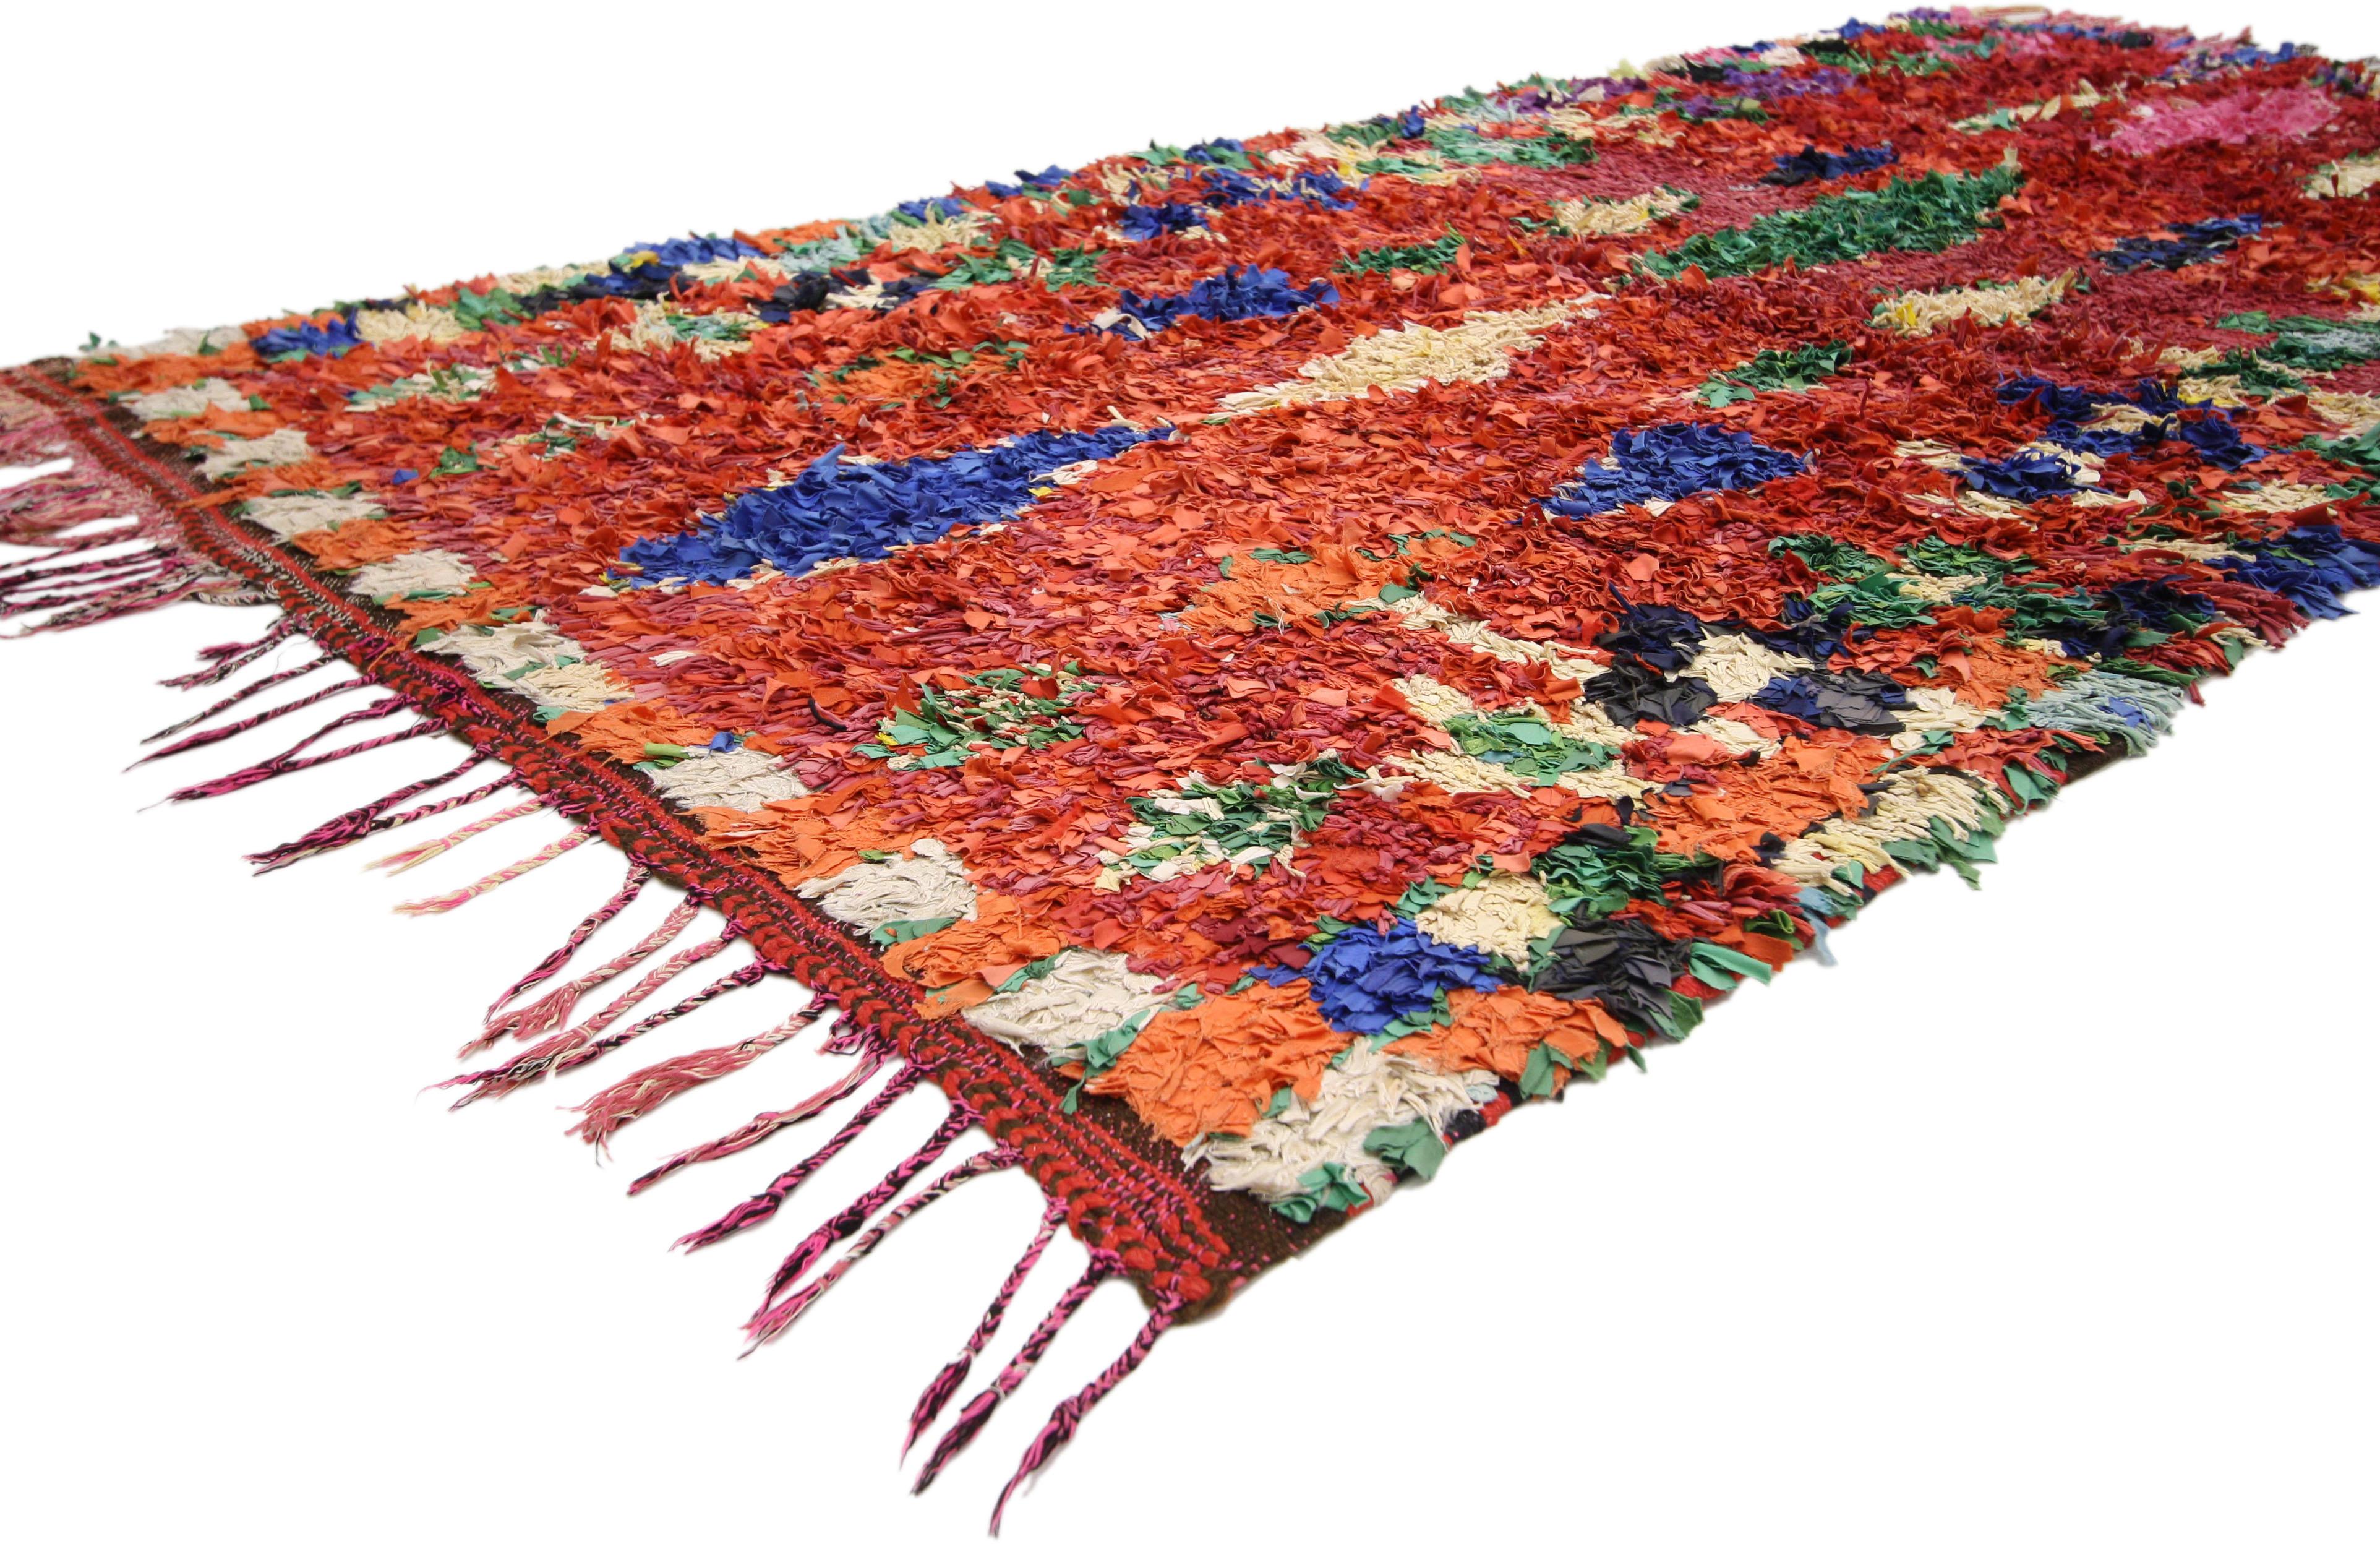 74726, vintage Berber Moroccan Boucherouite rug. This Vintage Berber Moroccan Boucherouite rug marries the vintage style of the Berbers with a vivacious color scheme geometric design that is a contemporary style. The center of the Moroccan